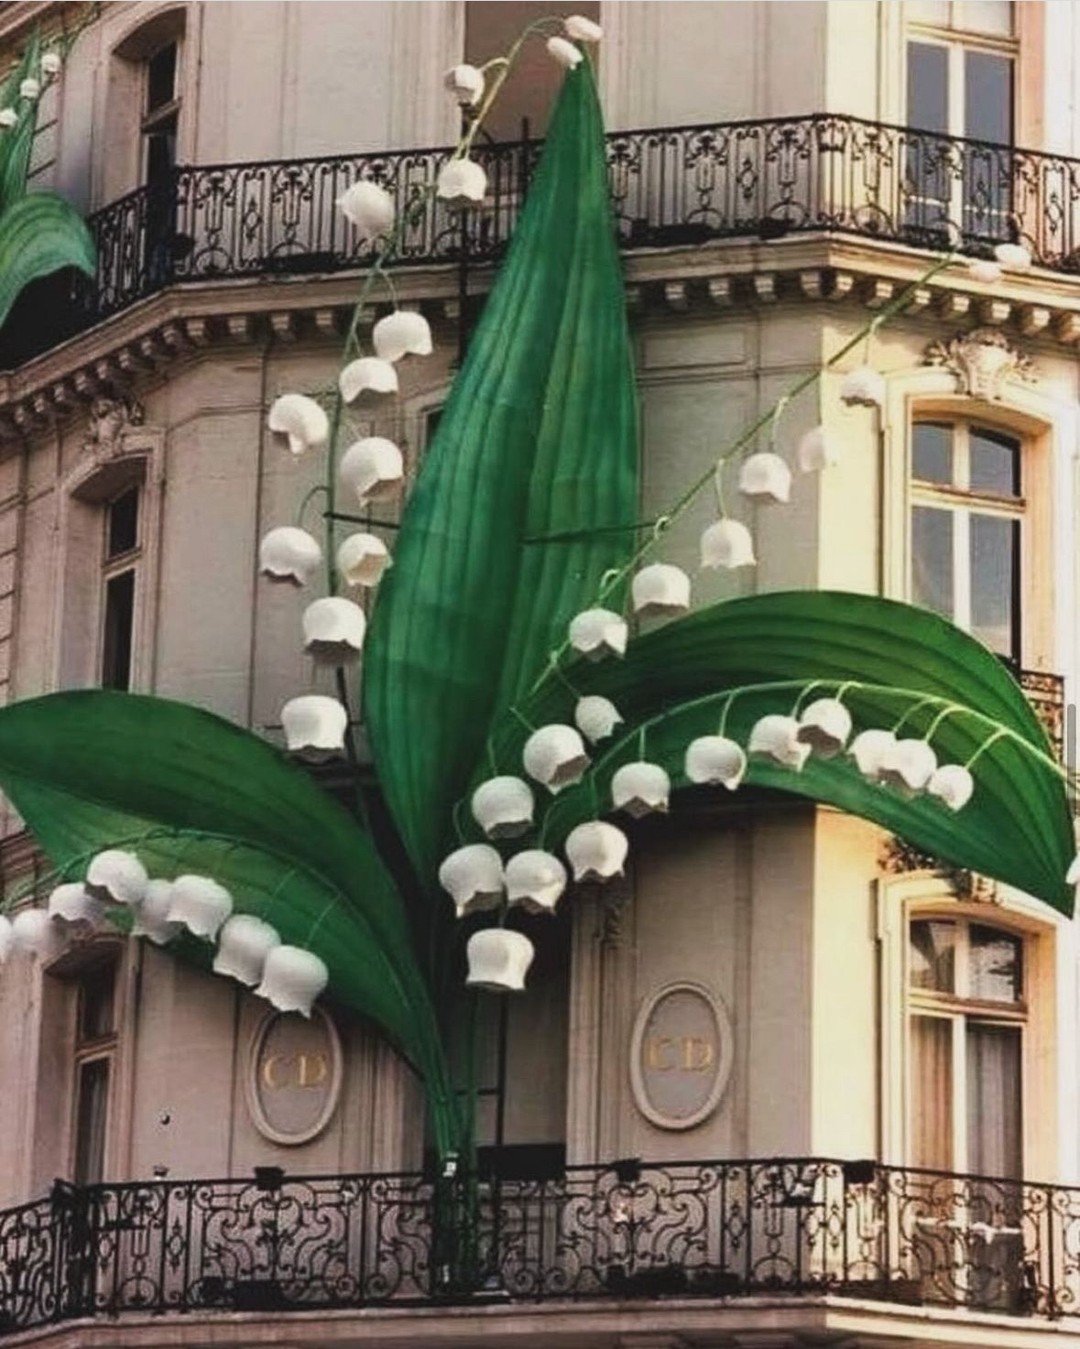 30 Rue Montaigne, Paris at Christian Dior. His favorite flower and good luck charm that became one of the symbols of his house.⁠
⁠
His first haute-couture collection had a dried sprig of lily of the valley sewn into the hem of each of his creations. 